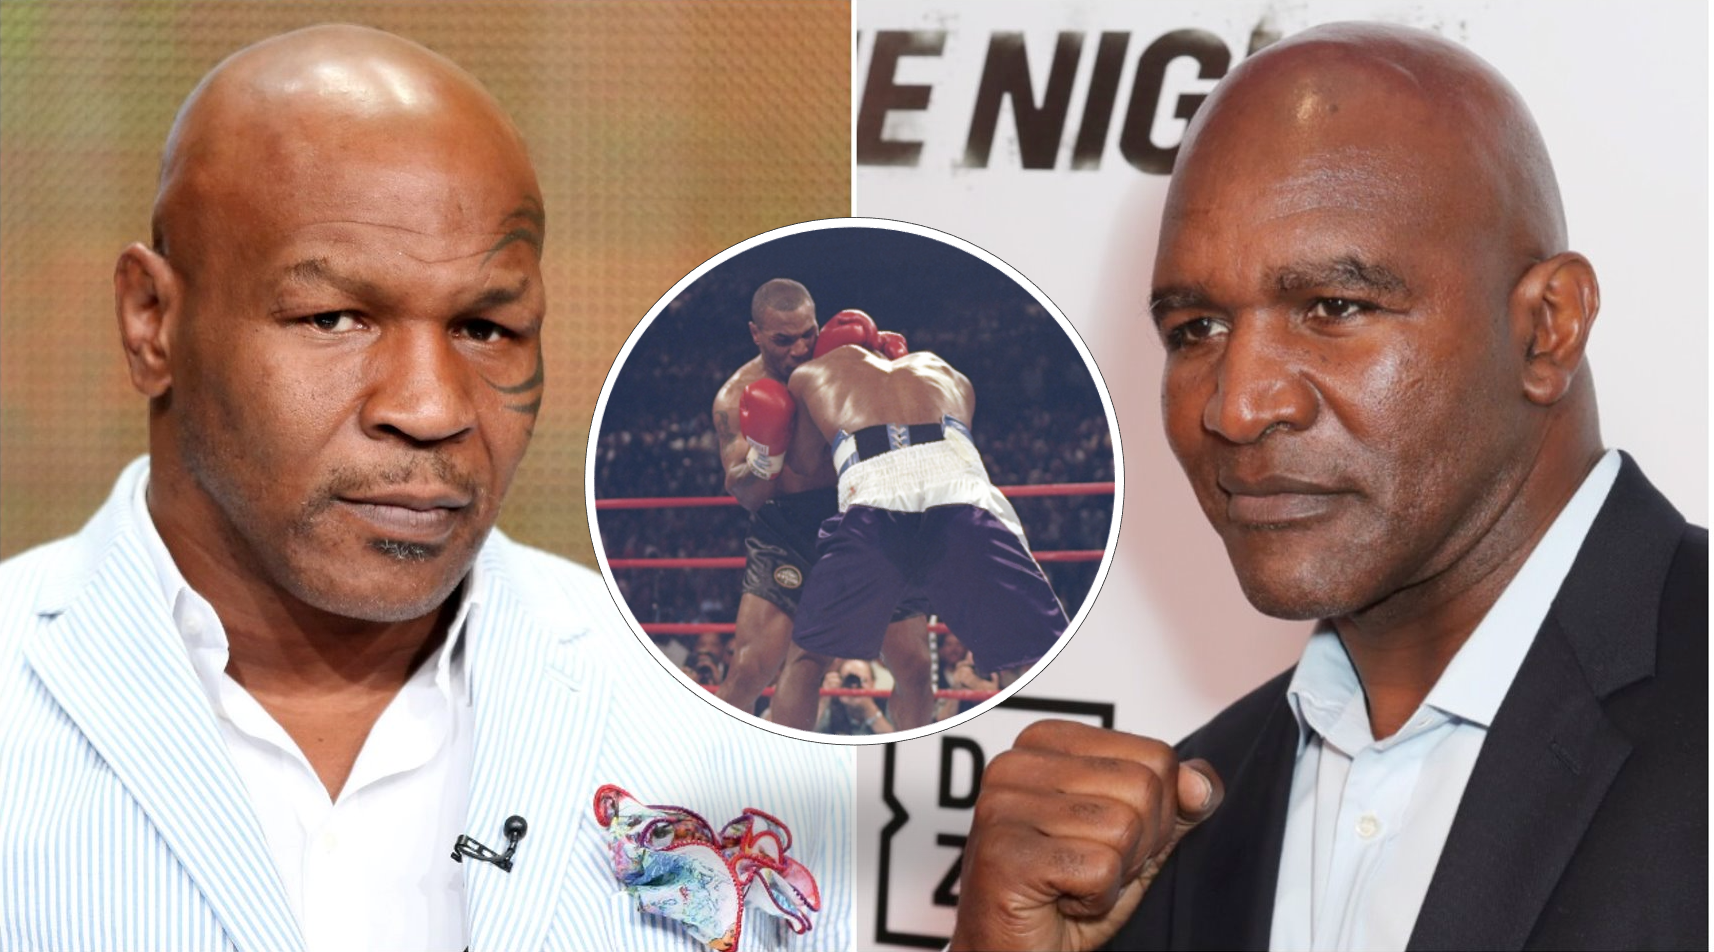 Mike Tyson on what Evander Holyfield's ear tasted like